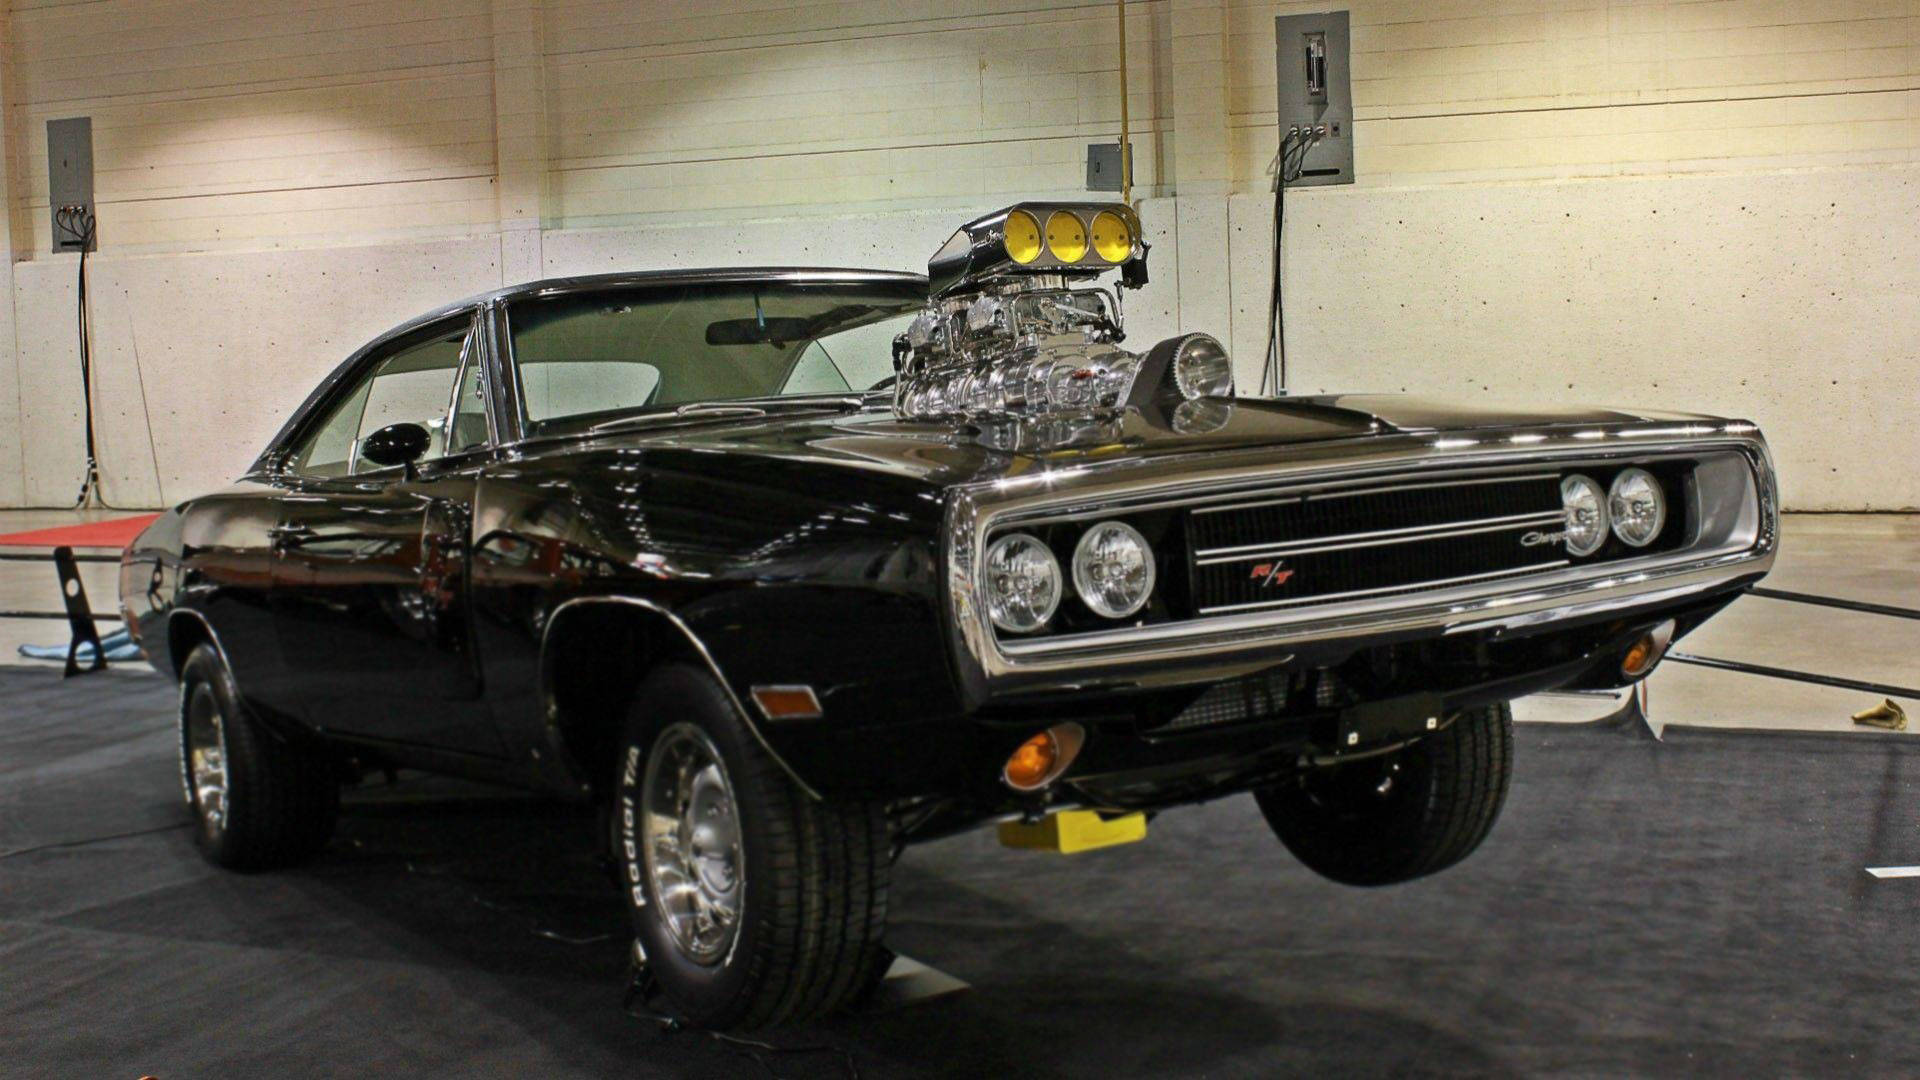 Vintage Power Unleashed: The 1969 Dodge Charger